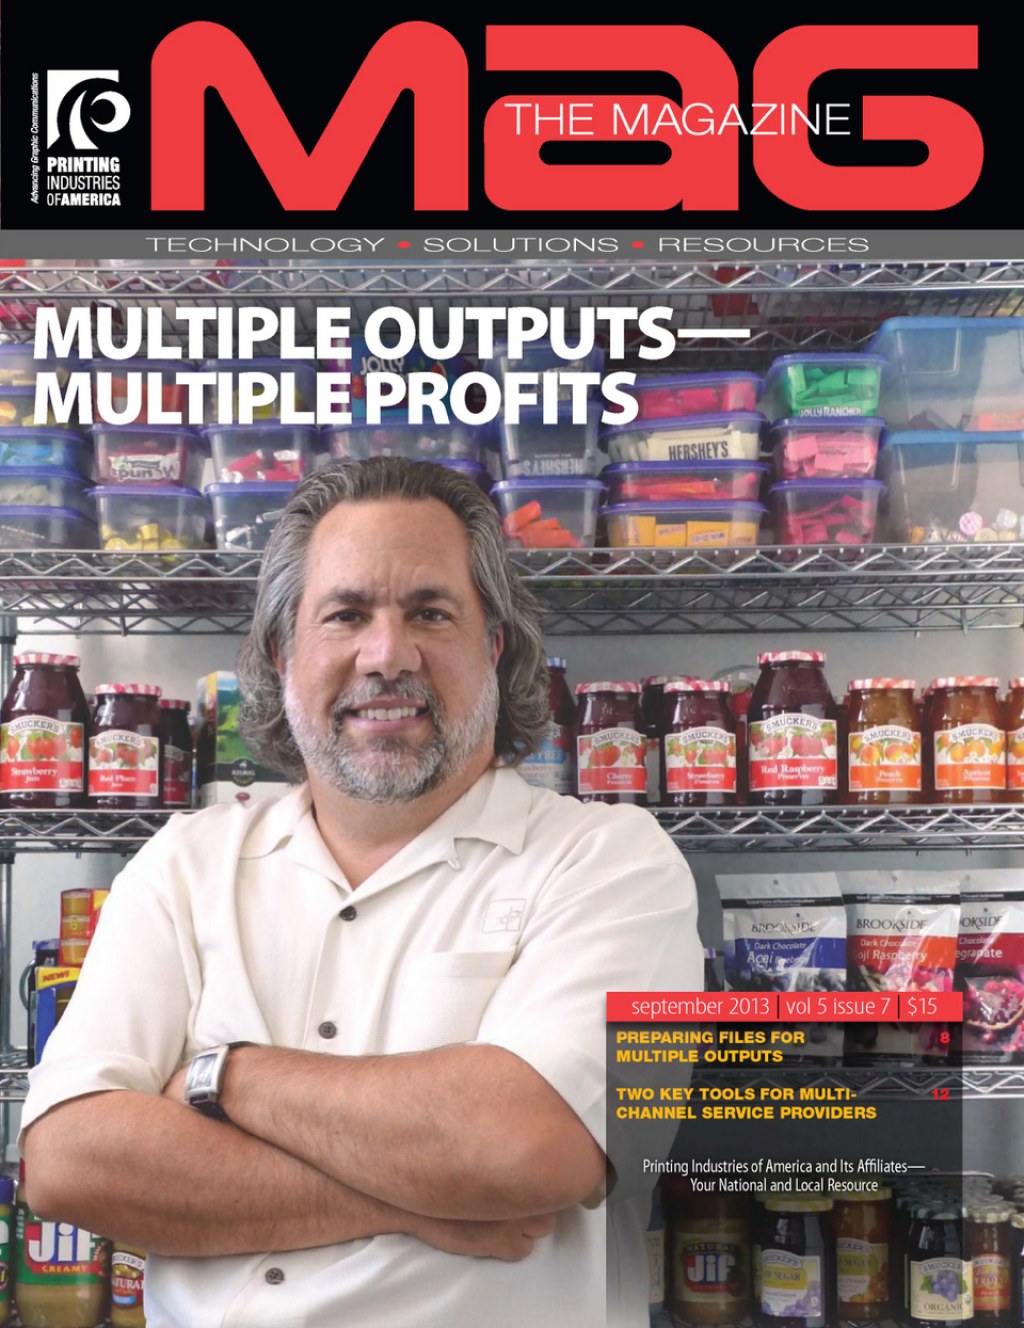 printing industries of america the magazine - Printing Industries of America The Magazine : Multiple Outputs